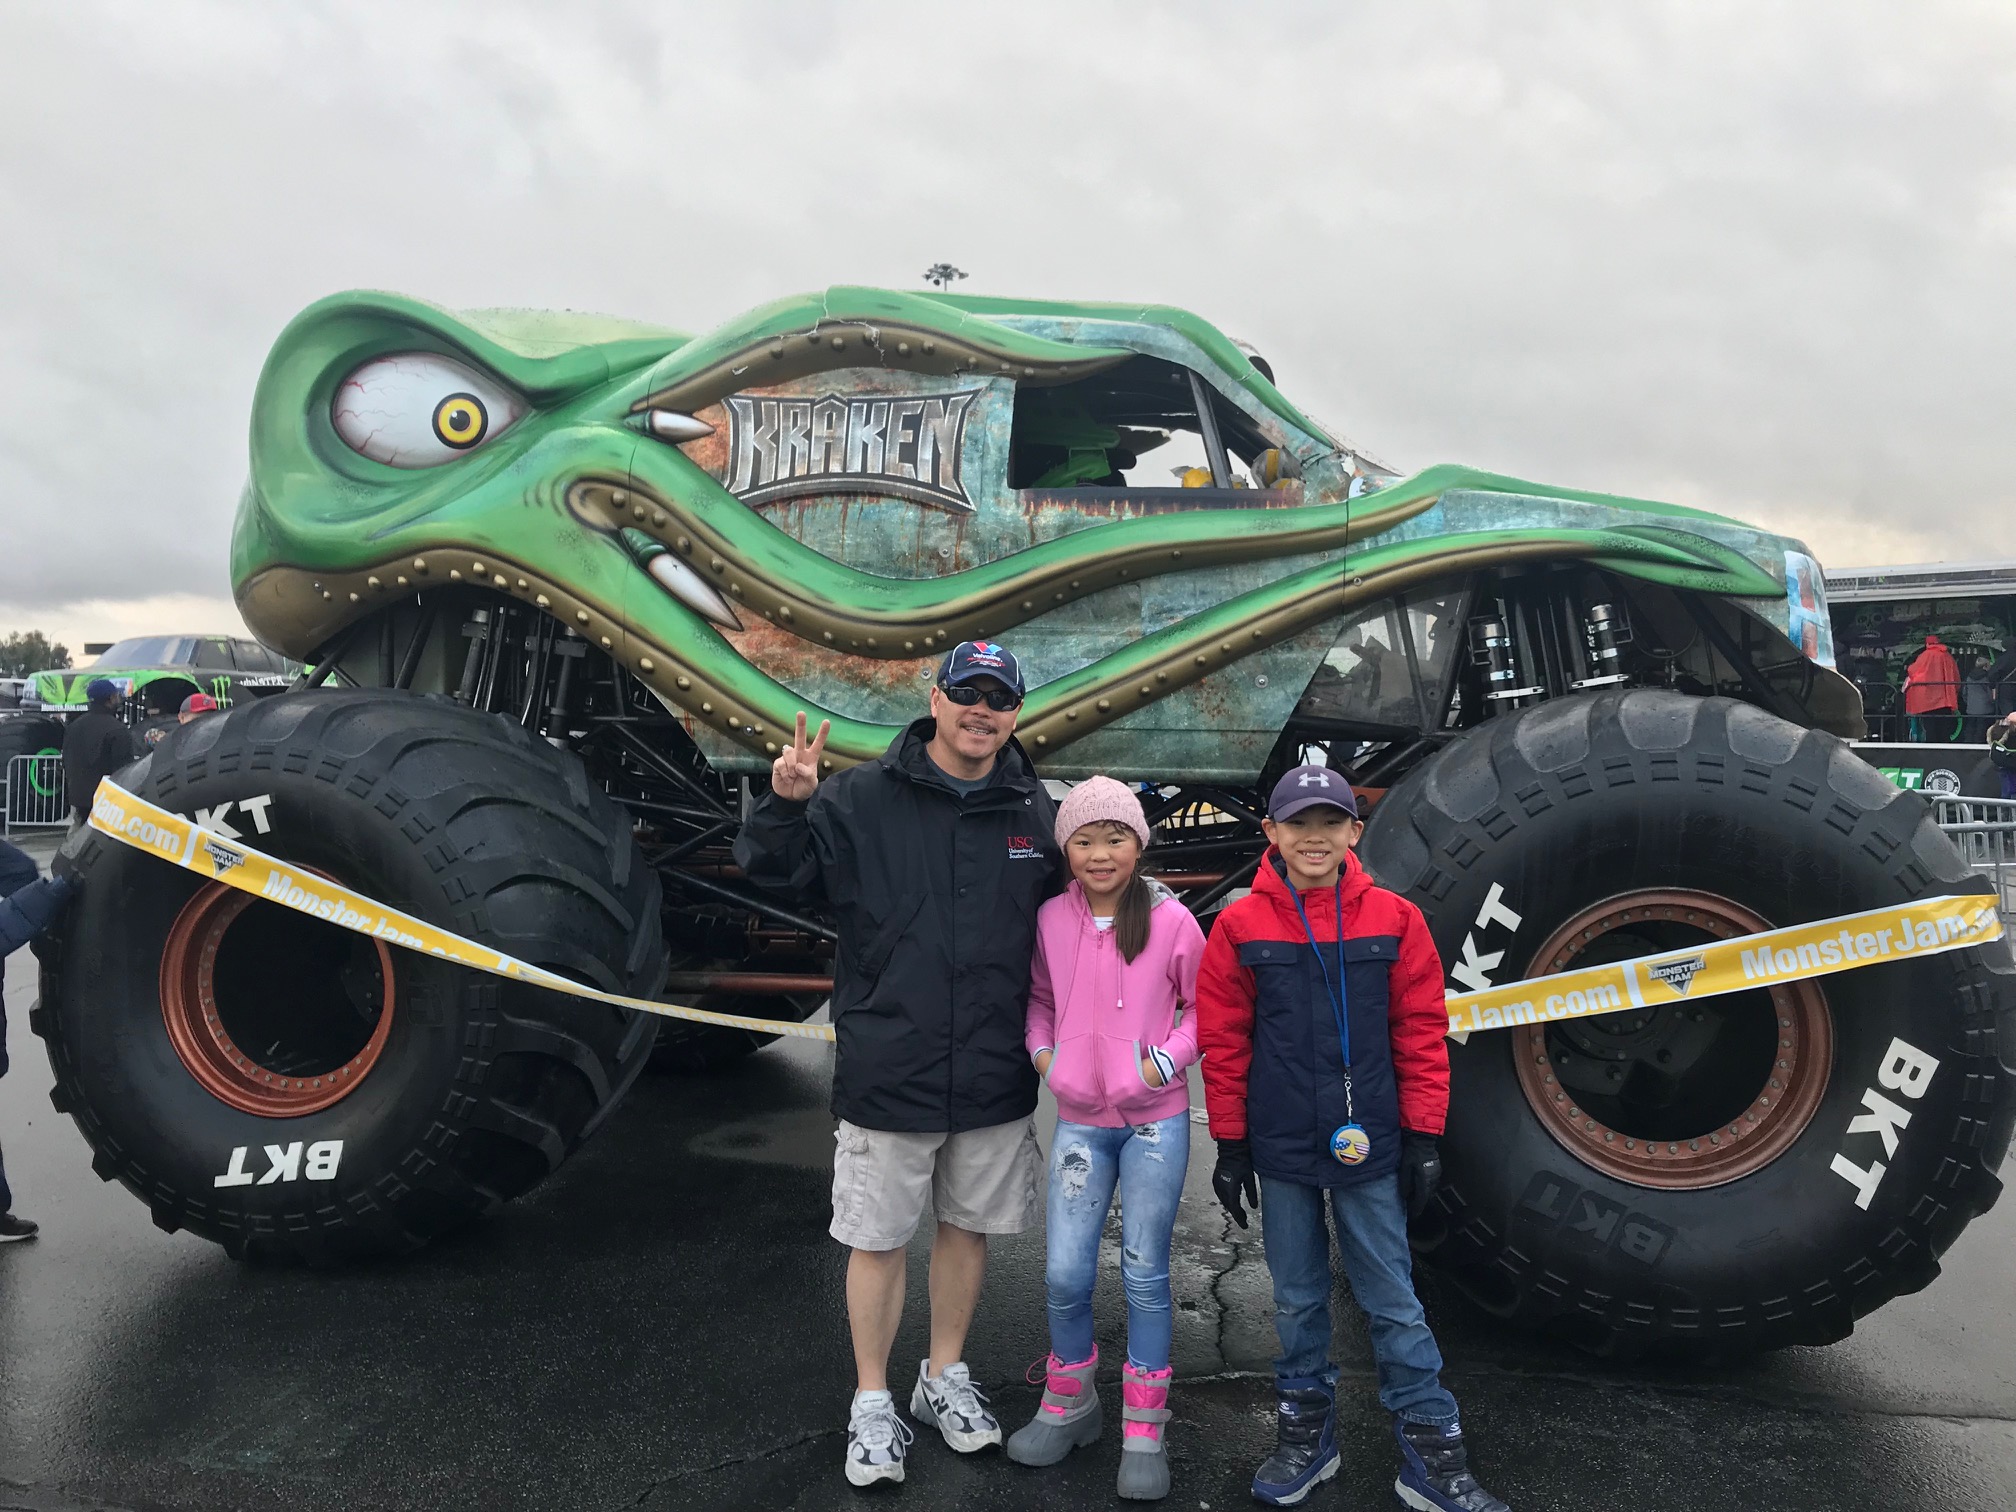 The kids were excited to go on a ride in a real Monster Truck